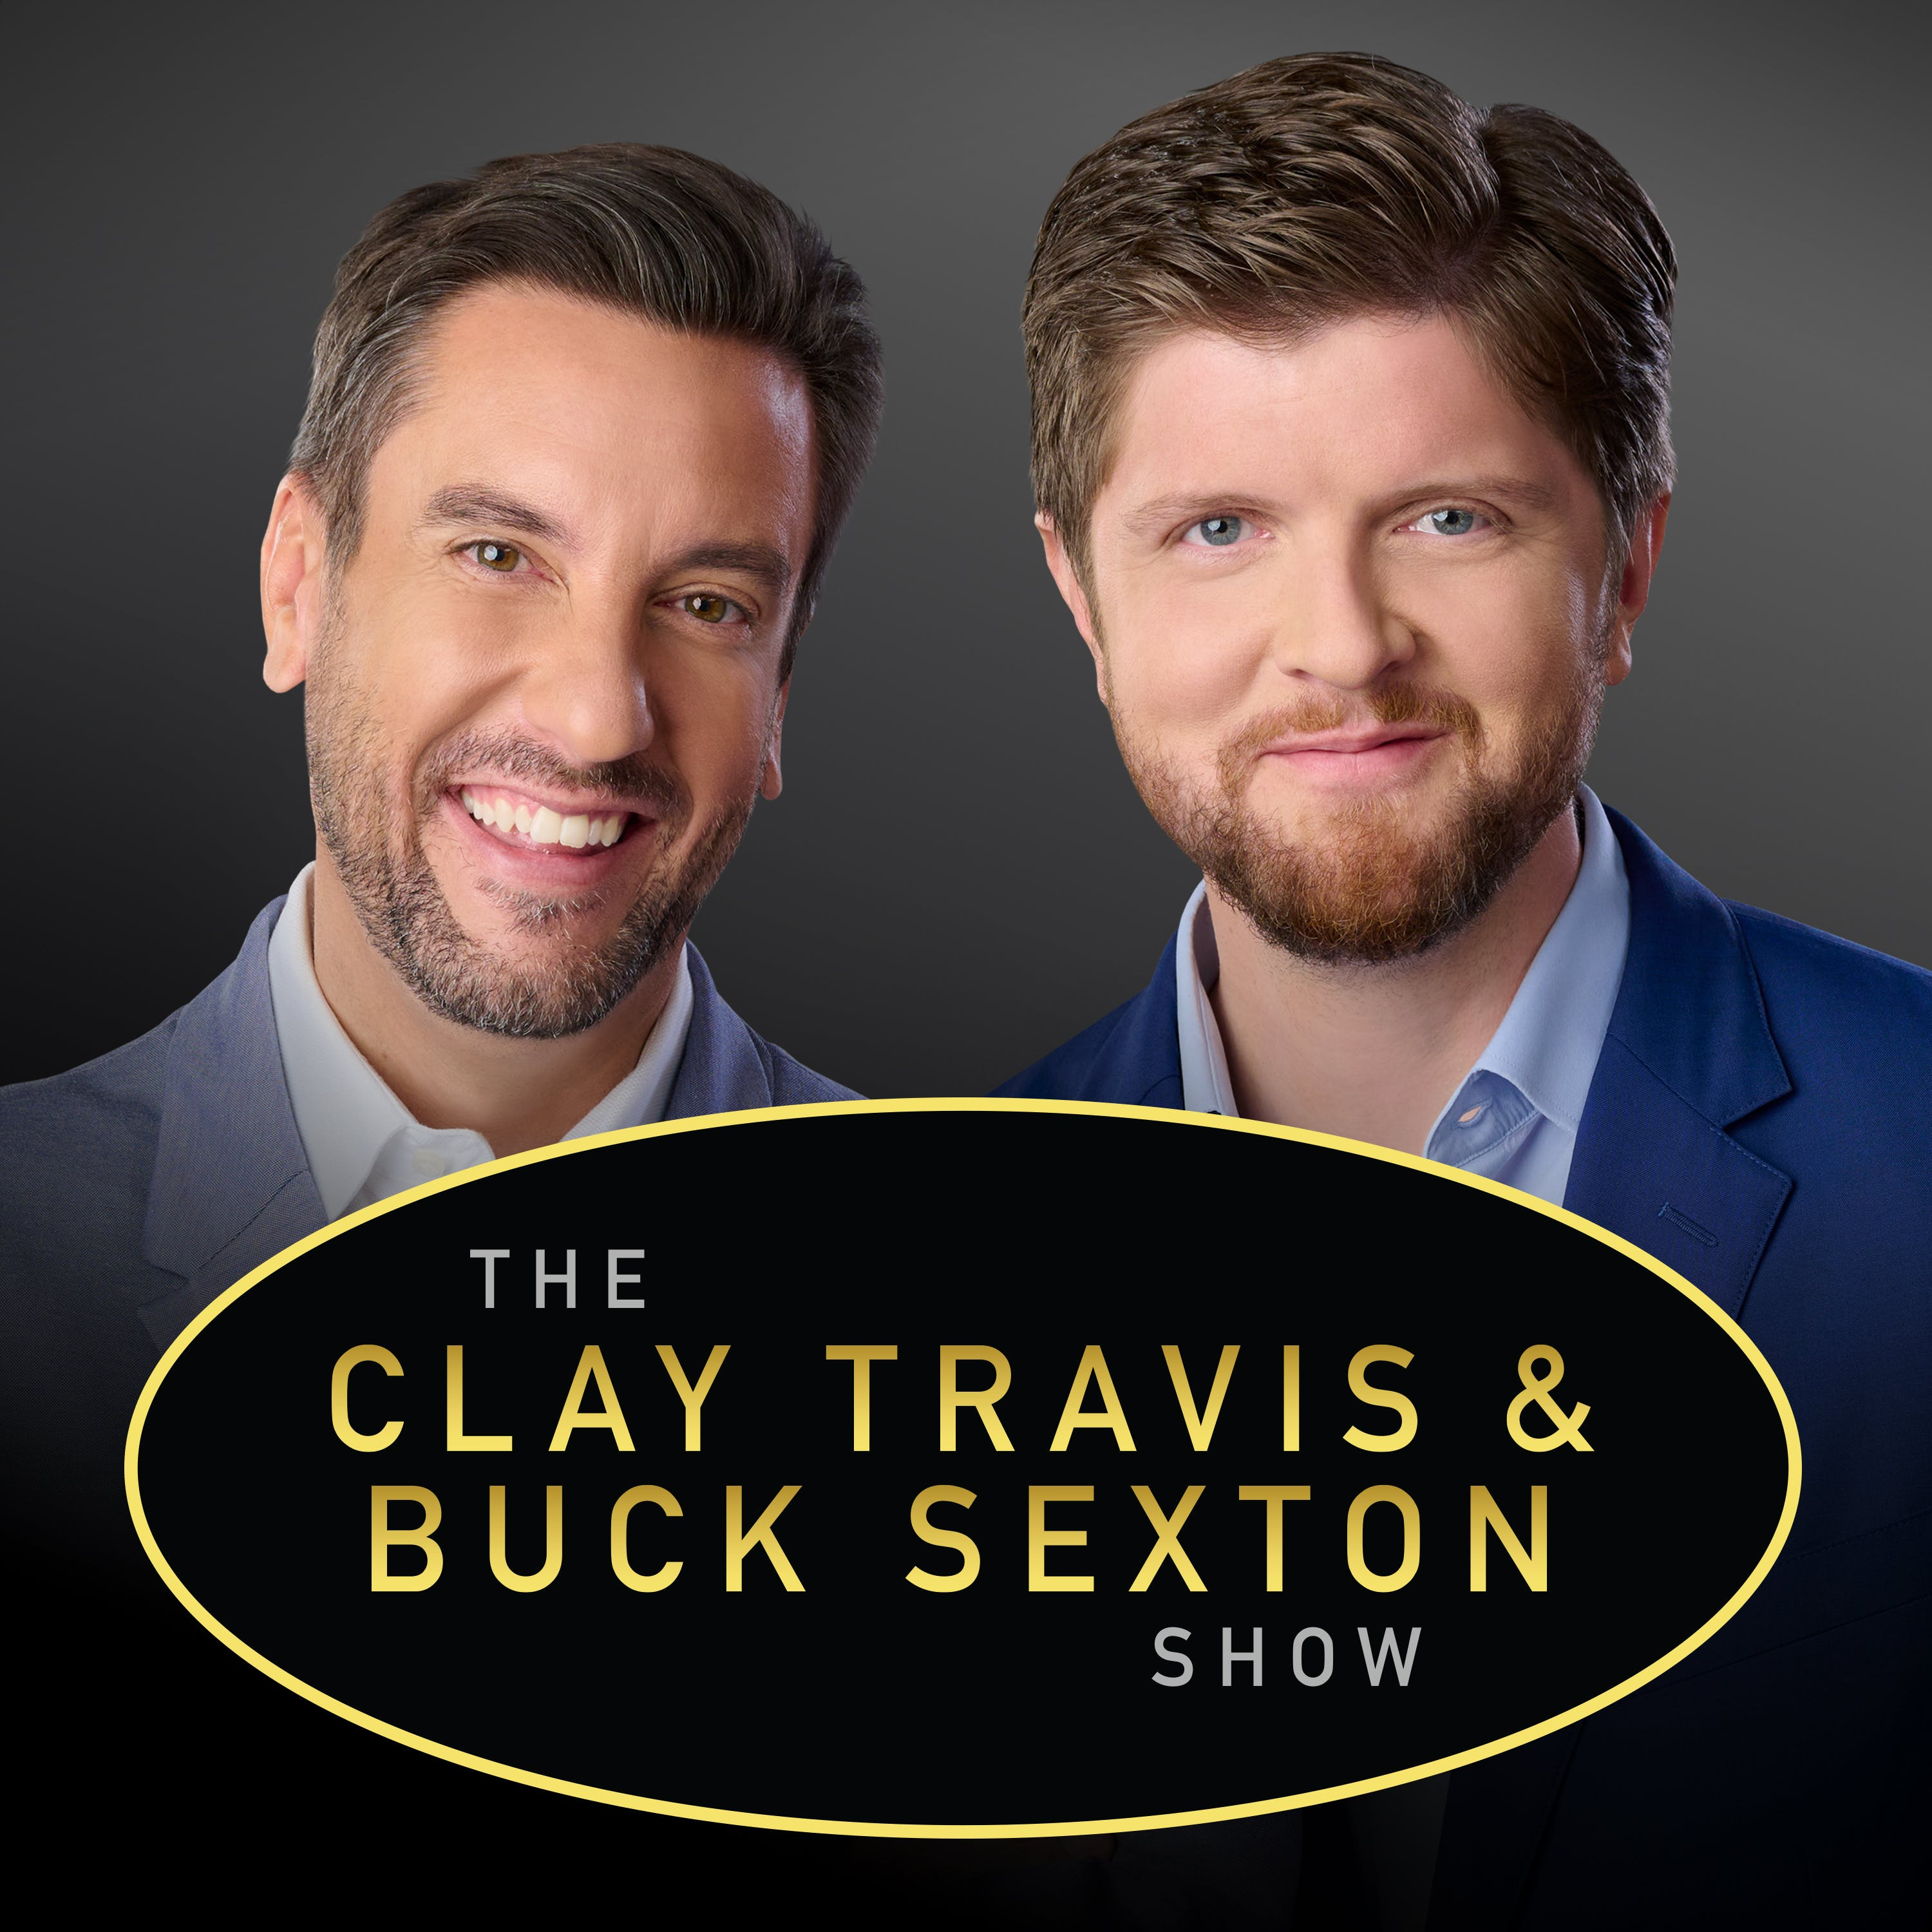 Clay Travis and Buck Sexton Show H2 – Sep 3 2021